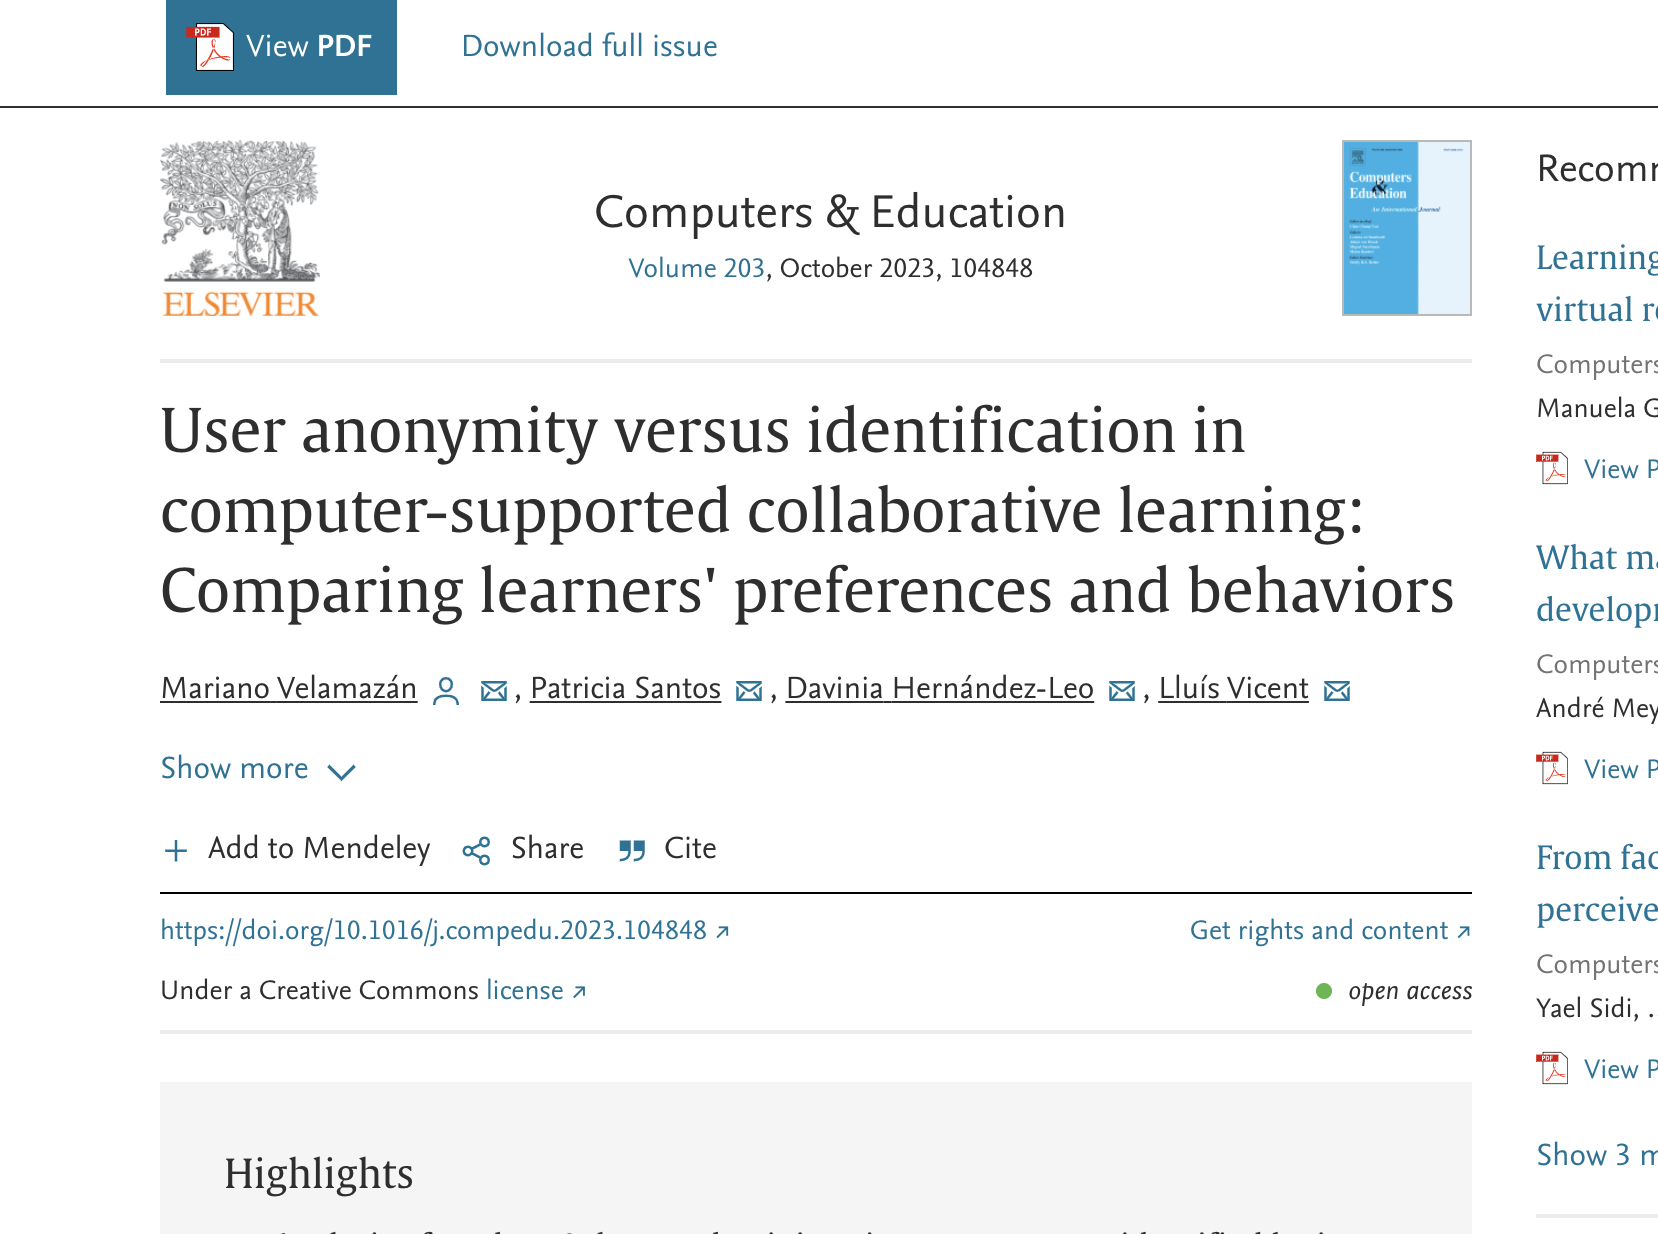 User anonymity versus identification in computer-supported collaborative learning